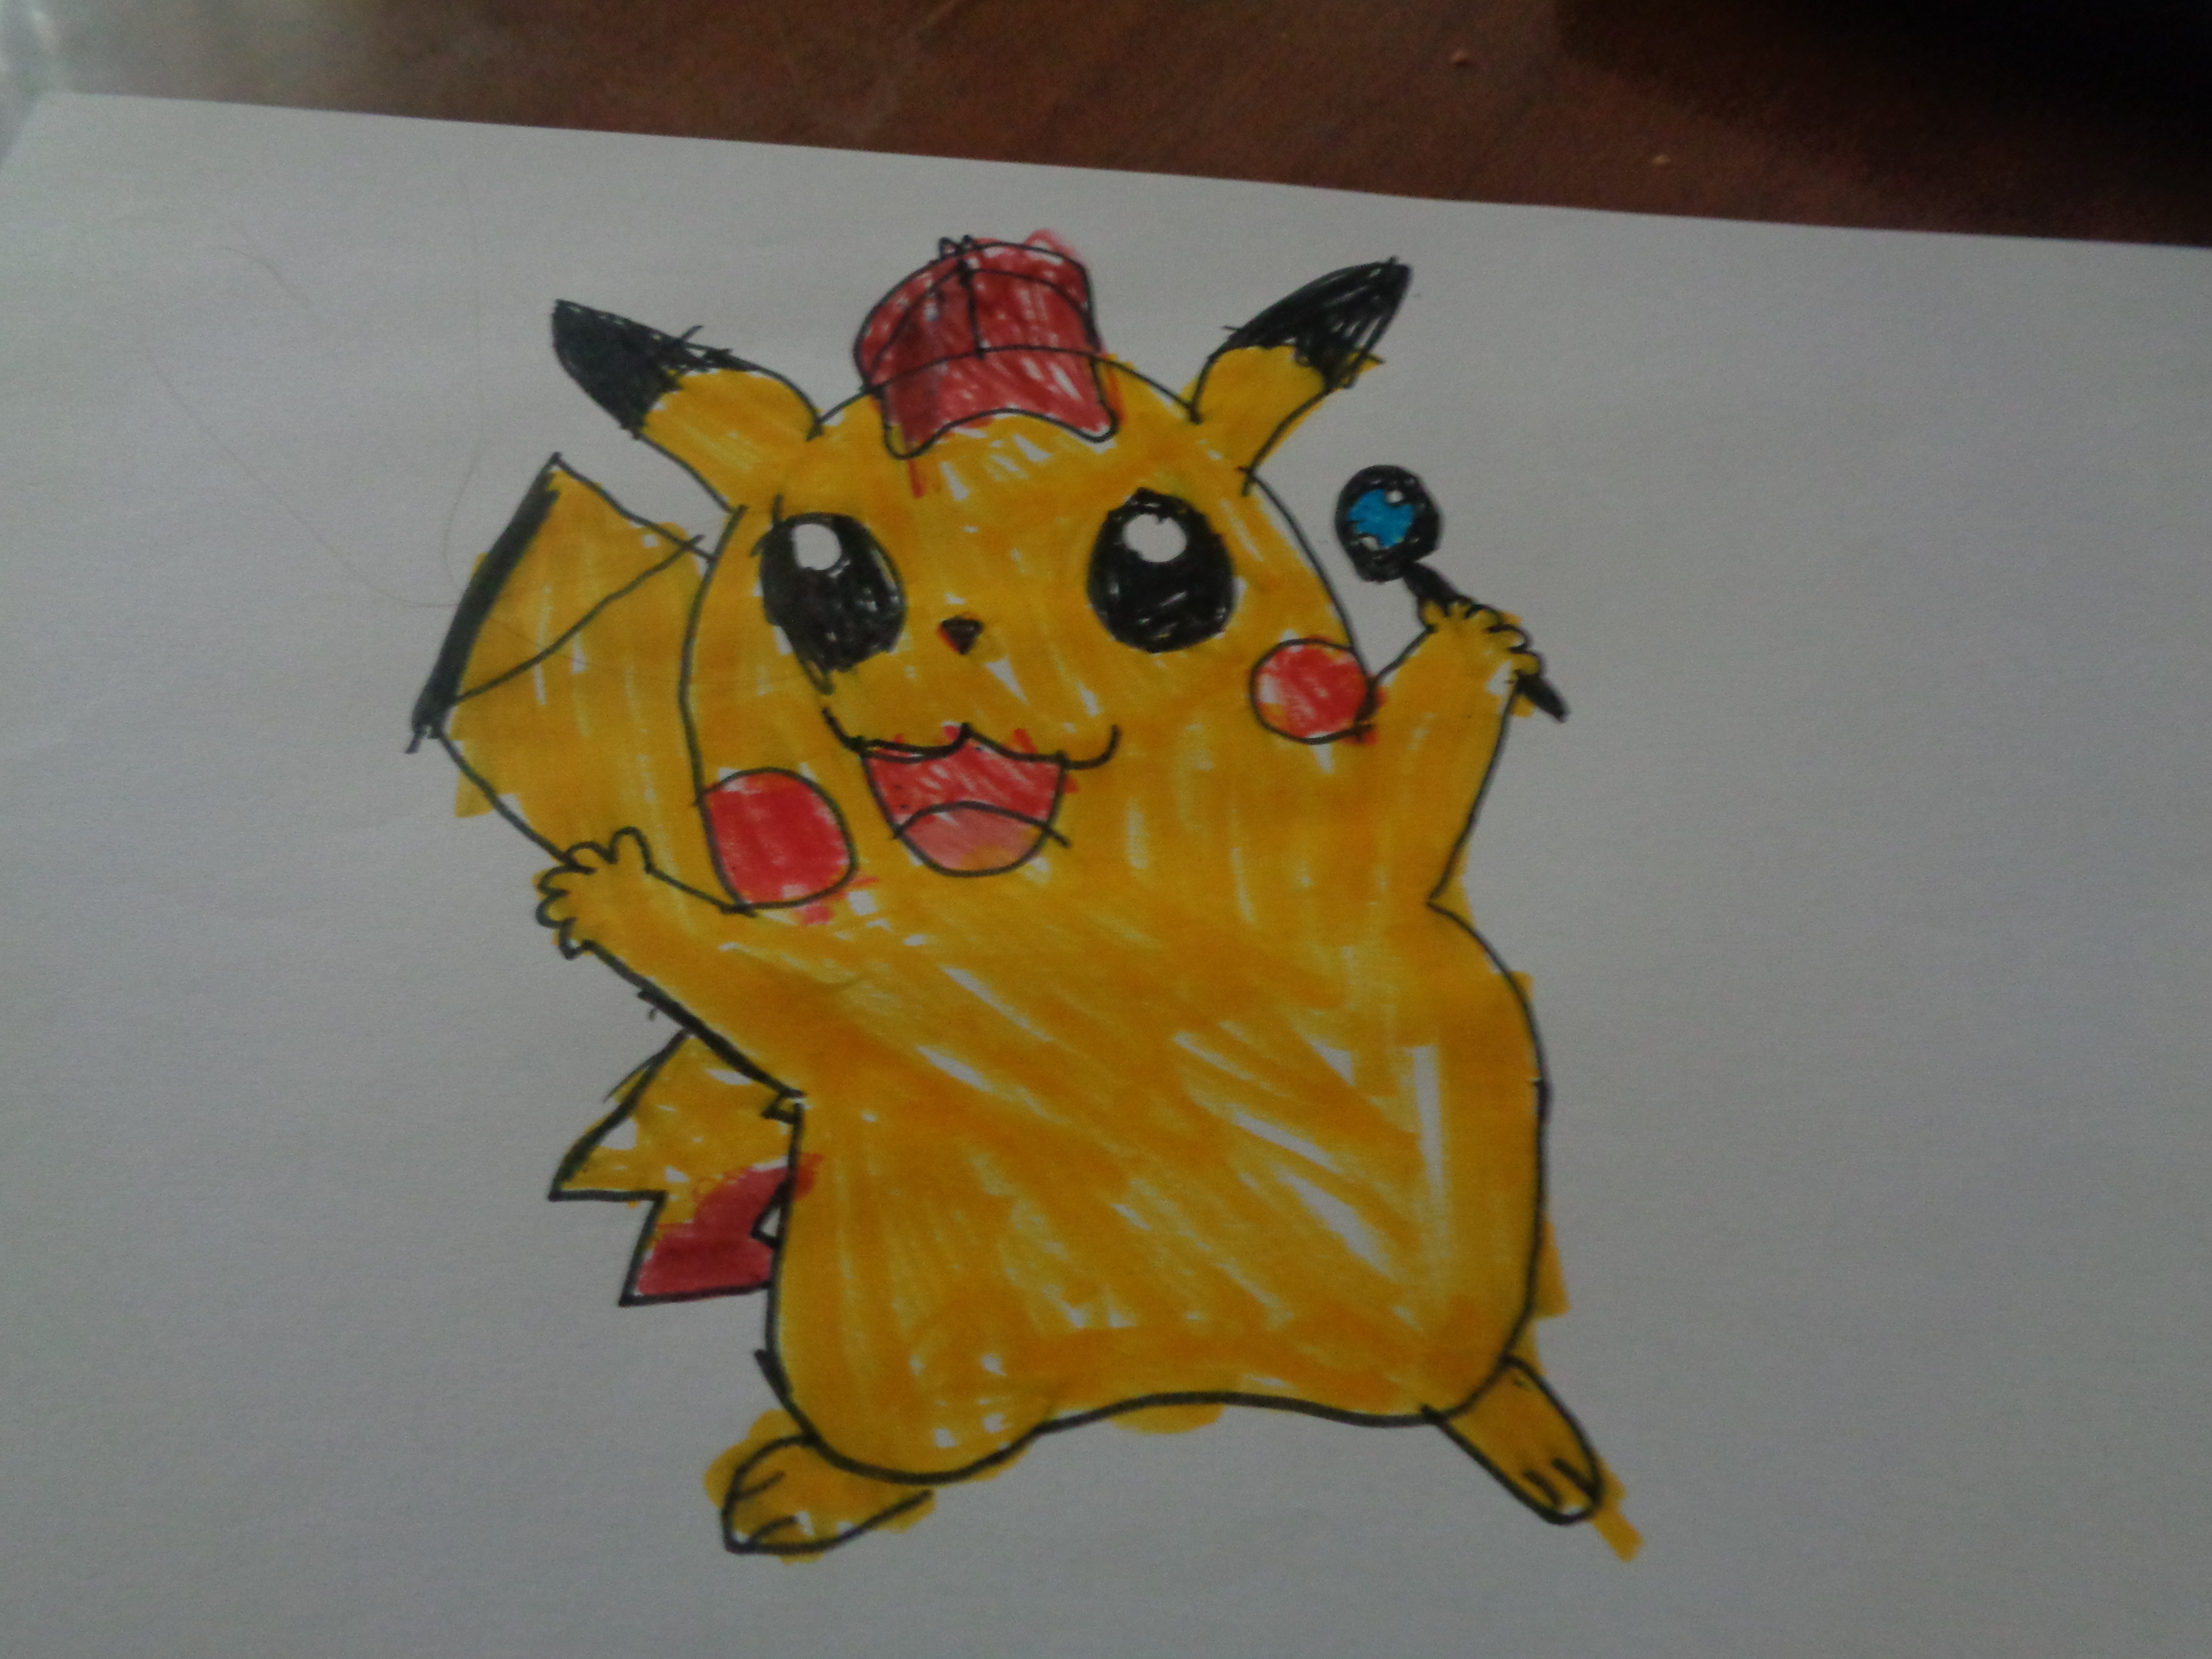 child's drawing of pikachu